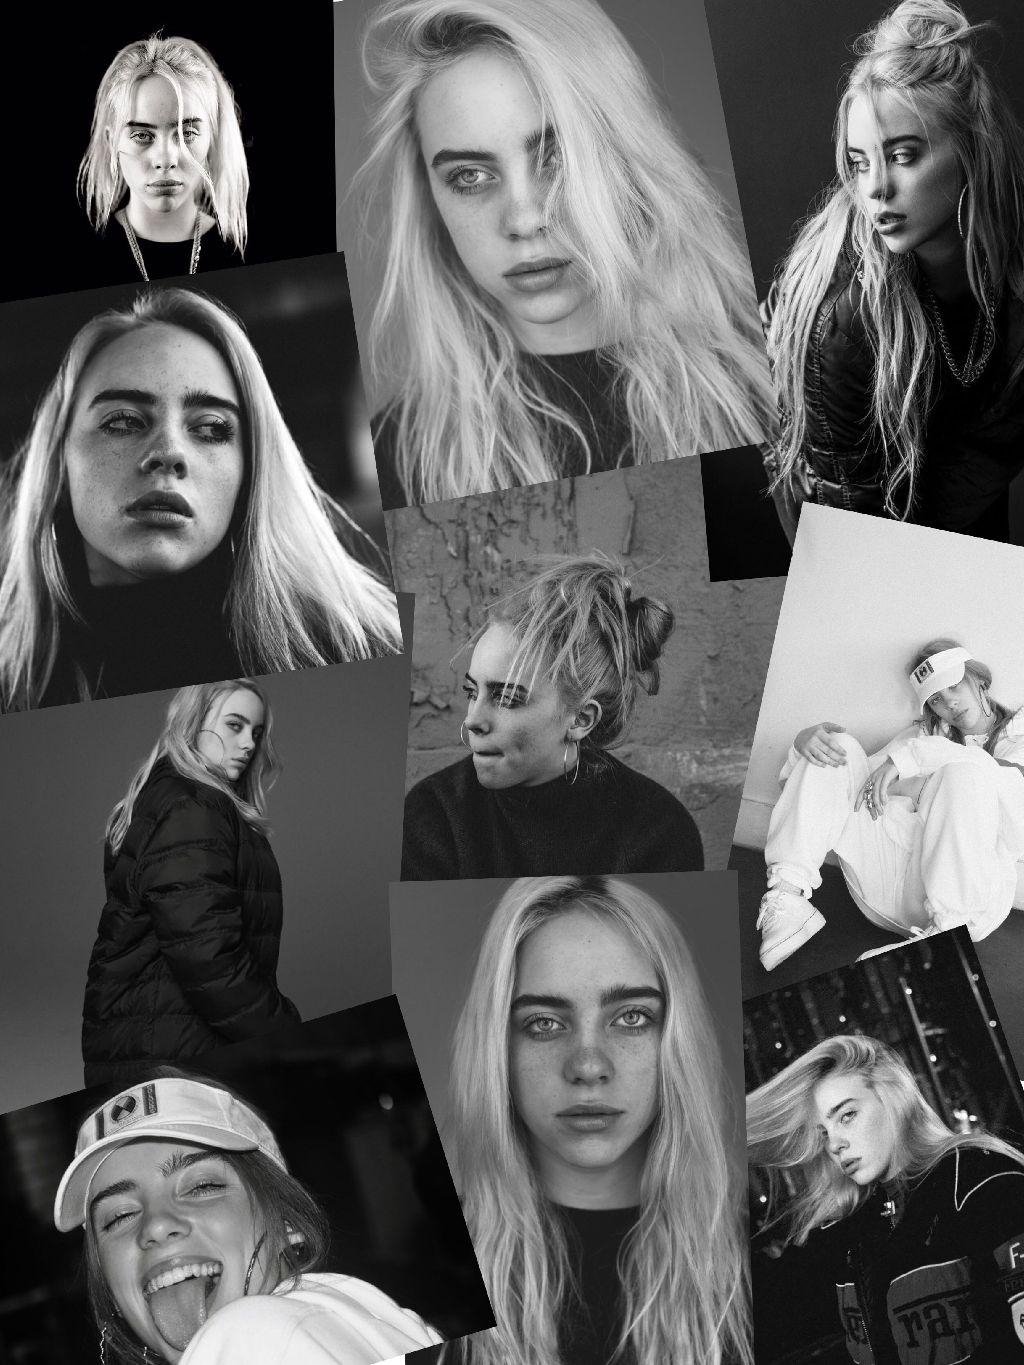 Billie Eilish Black And White Wallpapers Wallpaper Cave